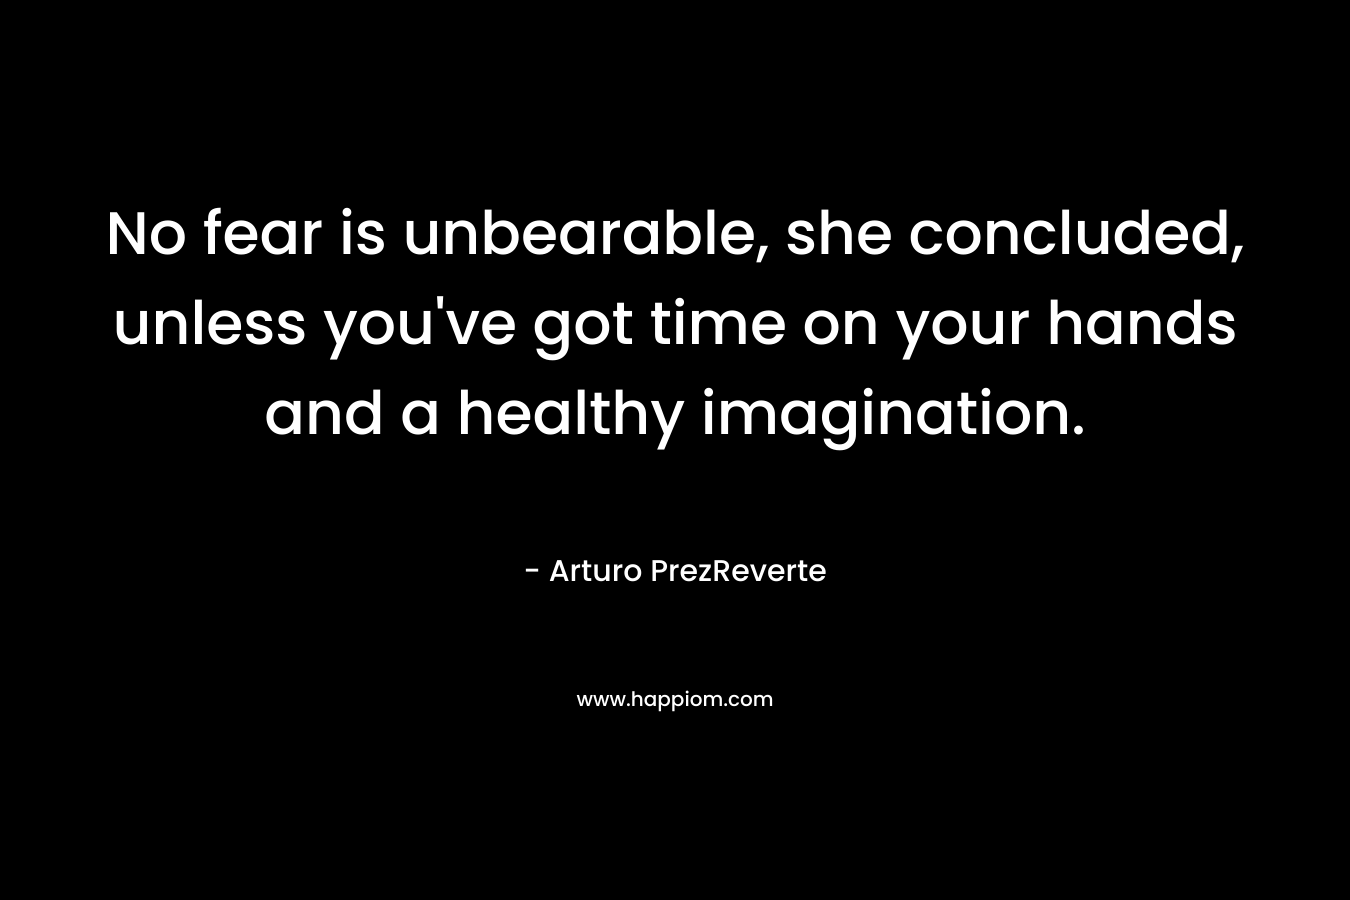 No fear is unbearable, she concluded, unless you’ve got time on your hands and a healthy imagination. – Arturo PrezReverte